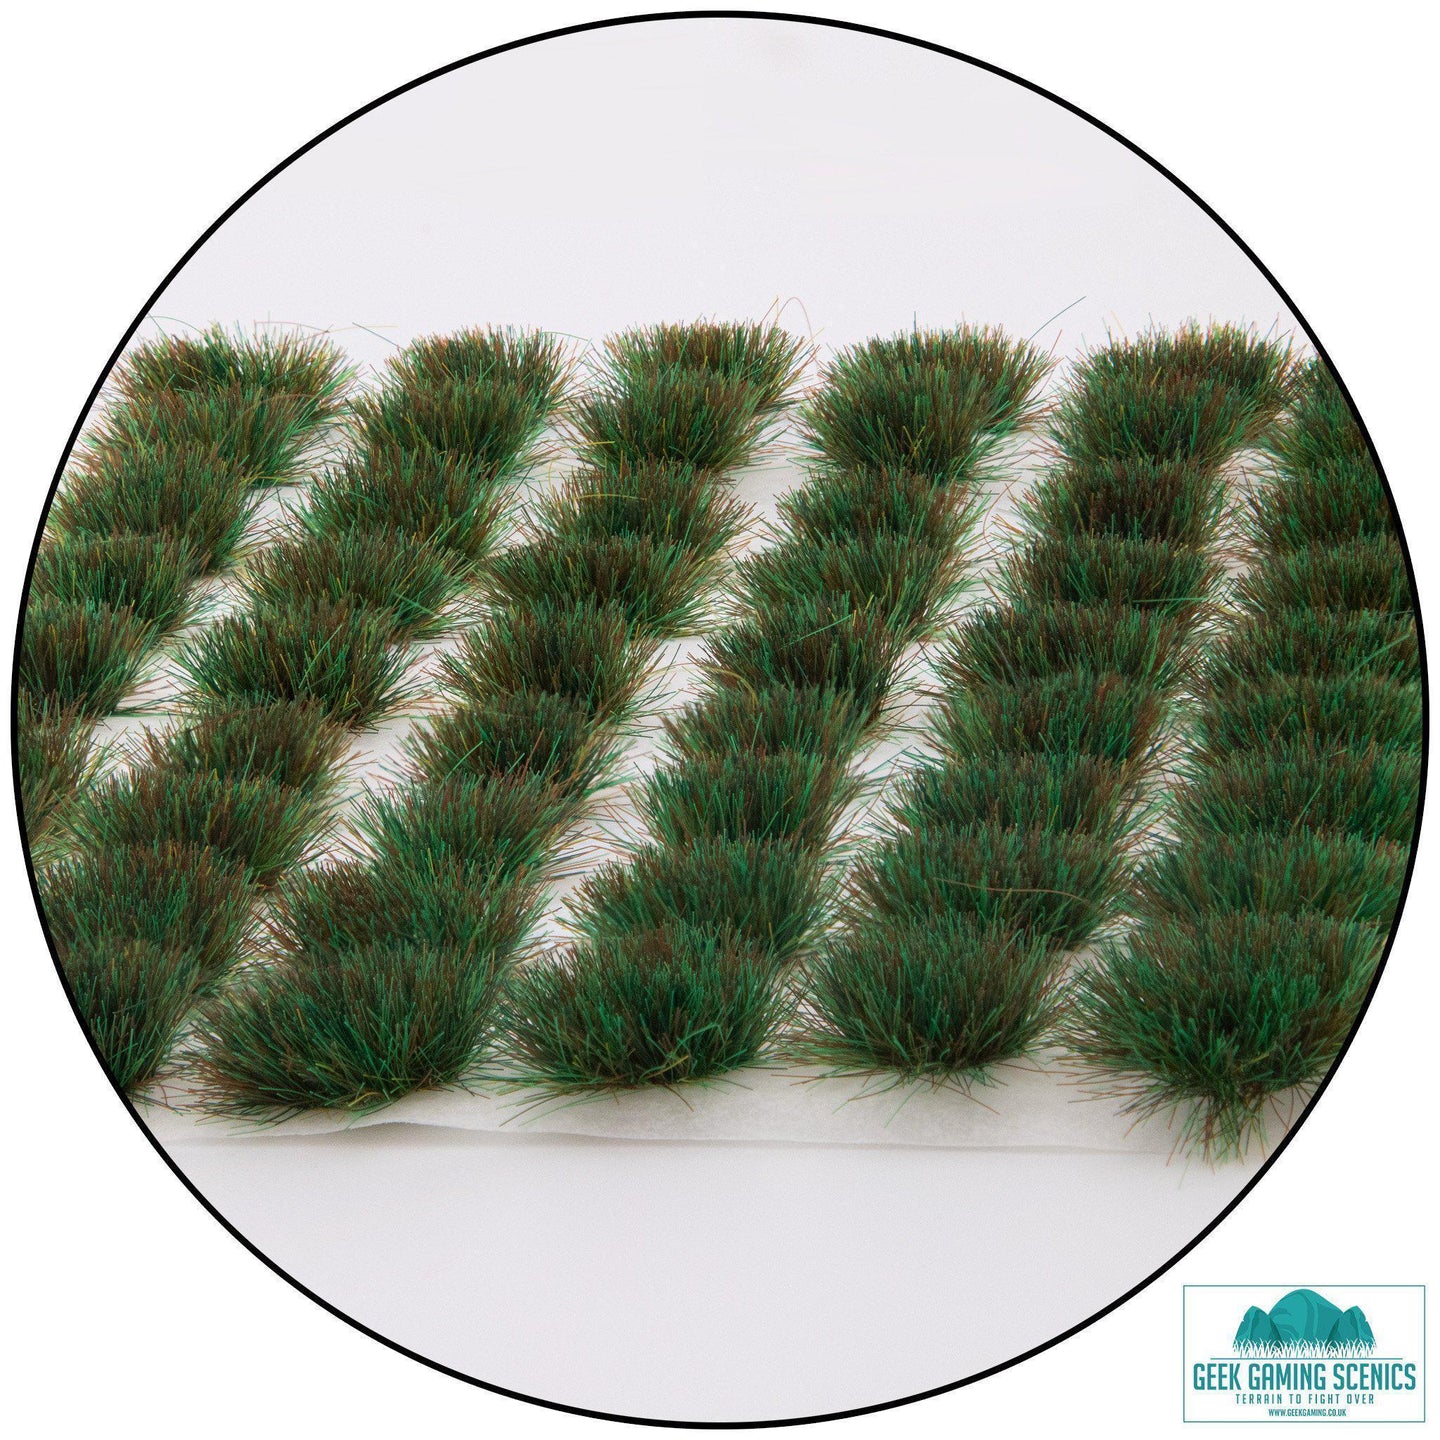 Summer 6mm Self Adhesive Static Grass Tufts x 100